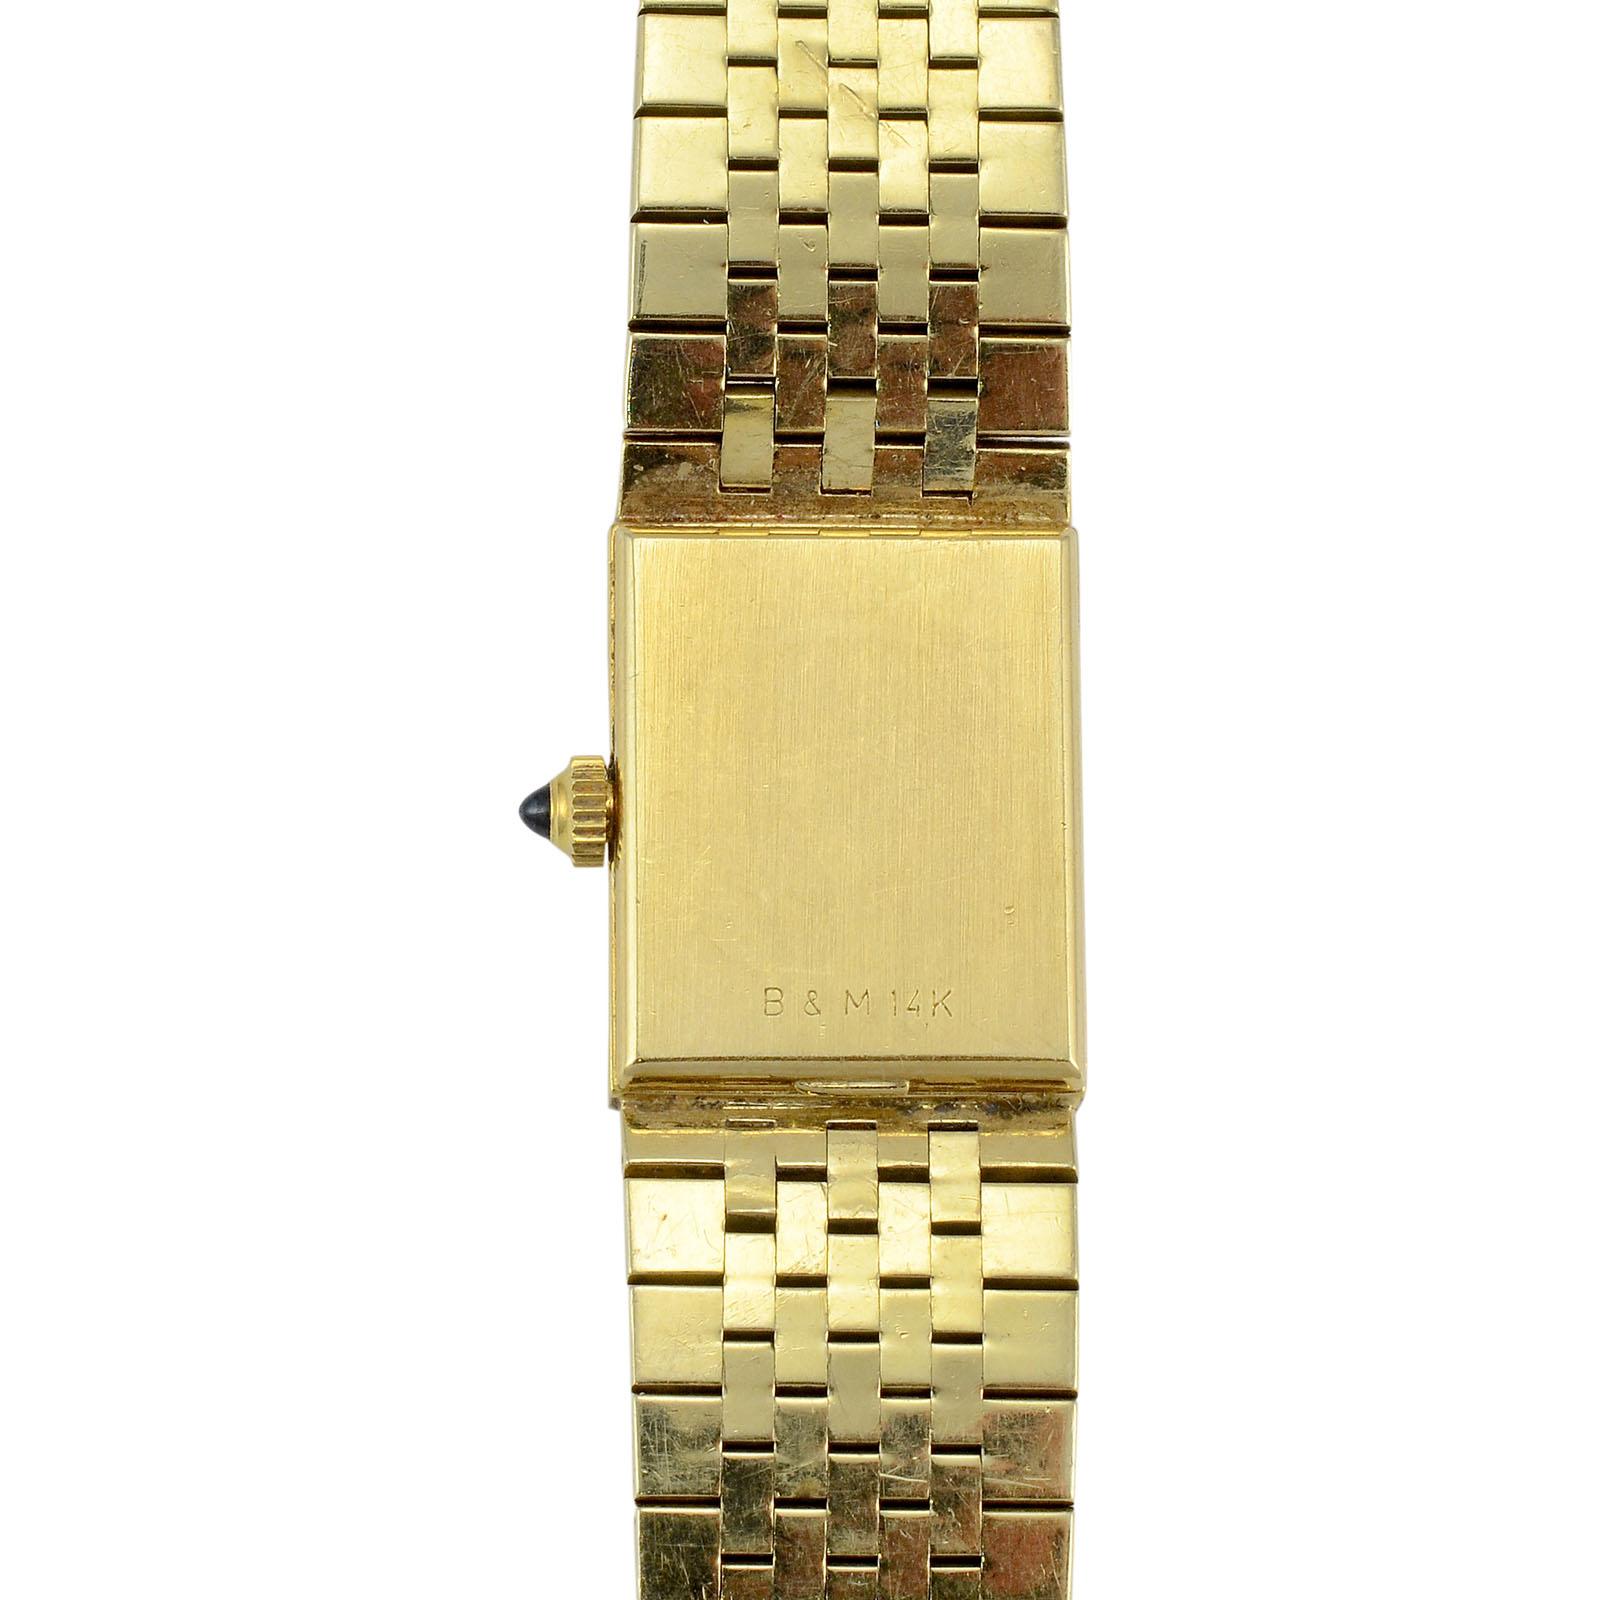 Estate Swiss ladies wrist watch by Baume and Mercier. This 14 karat yellow gold wrist watch by Baume et Mercier features a quartz movement, and bracelet with 12 diamonds at 0.22 carat total weight. The diamonds have VVS-VS clarity and F-G color.